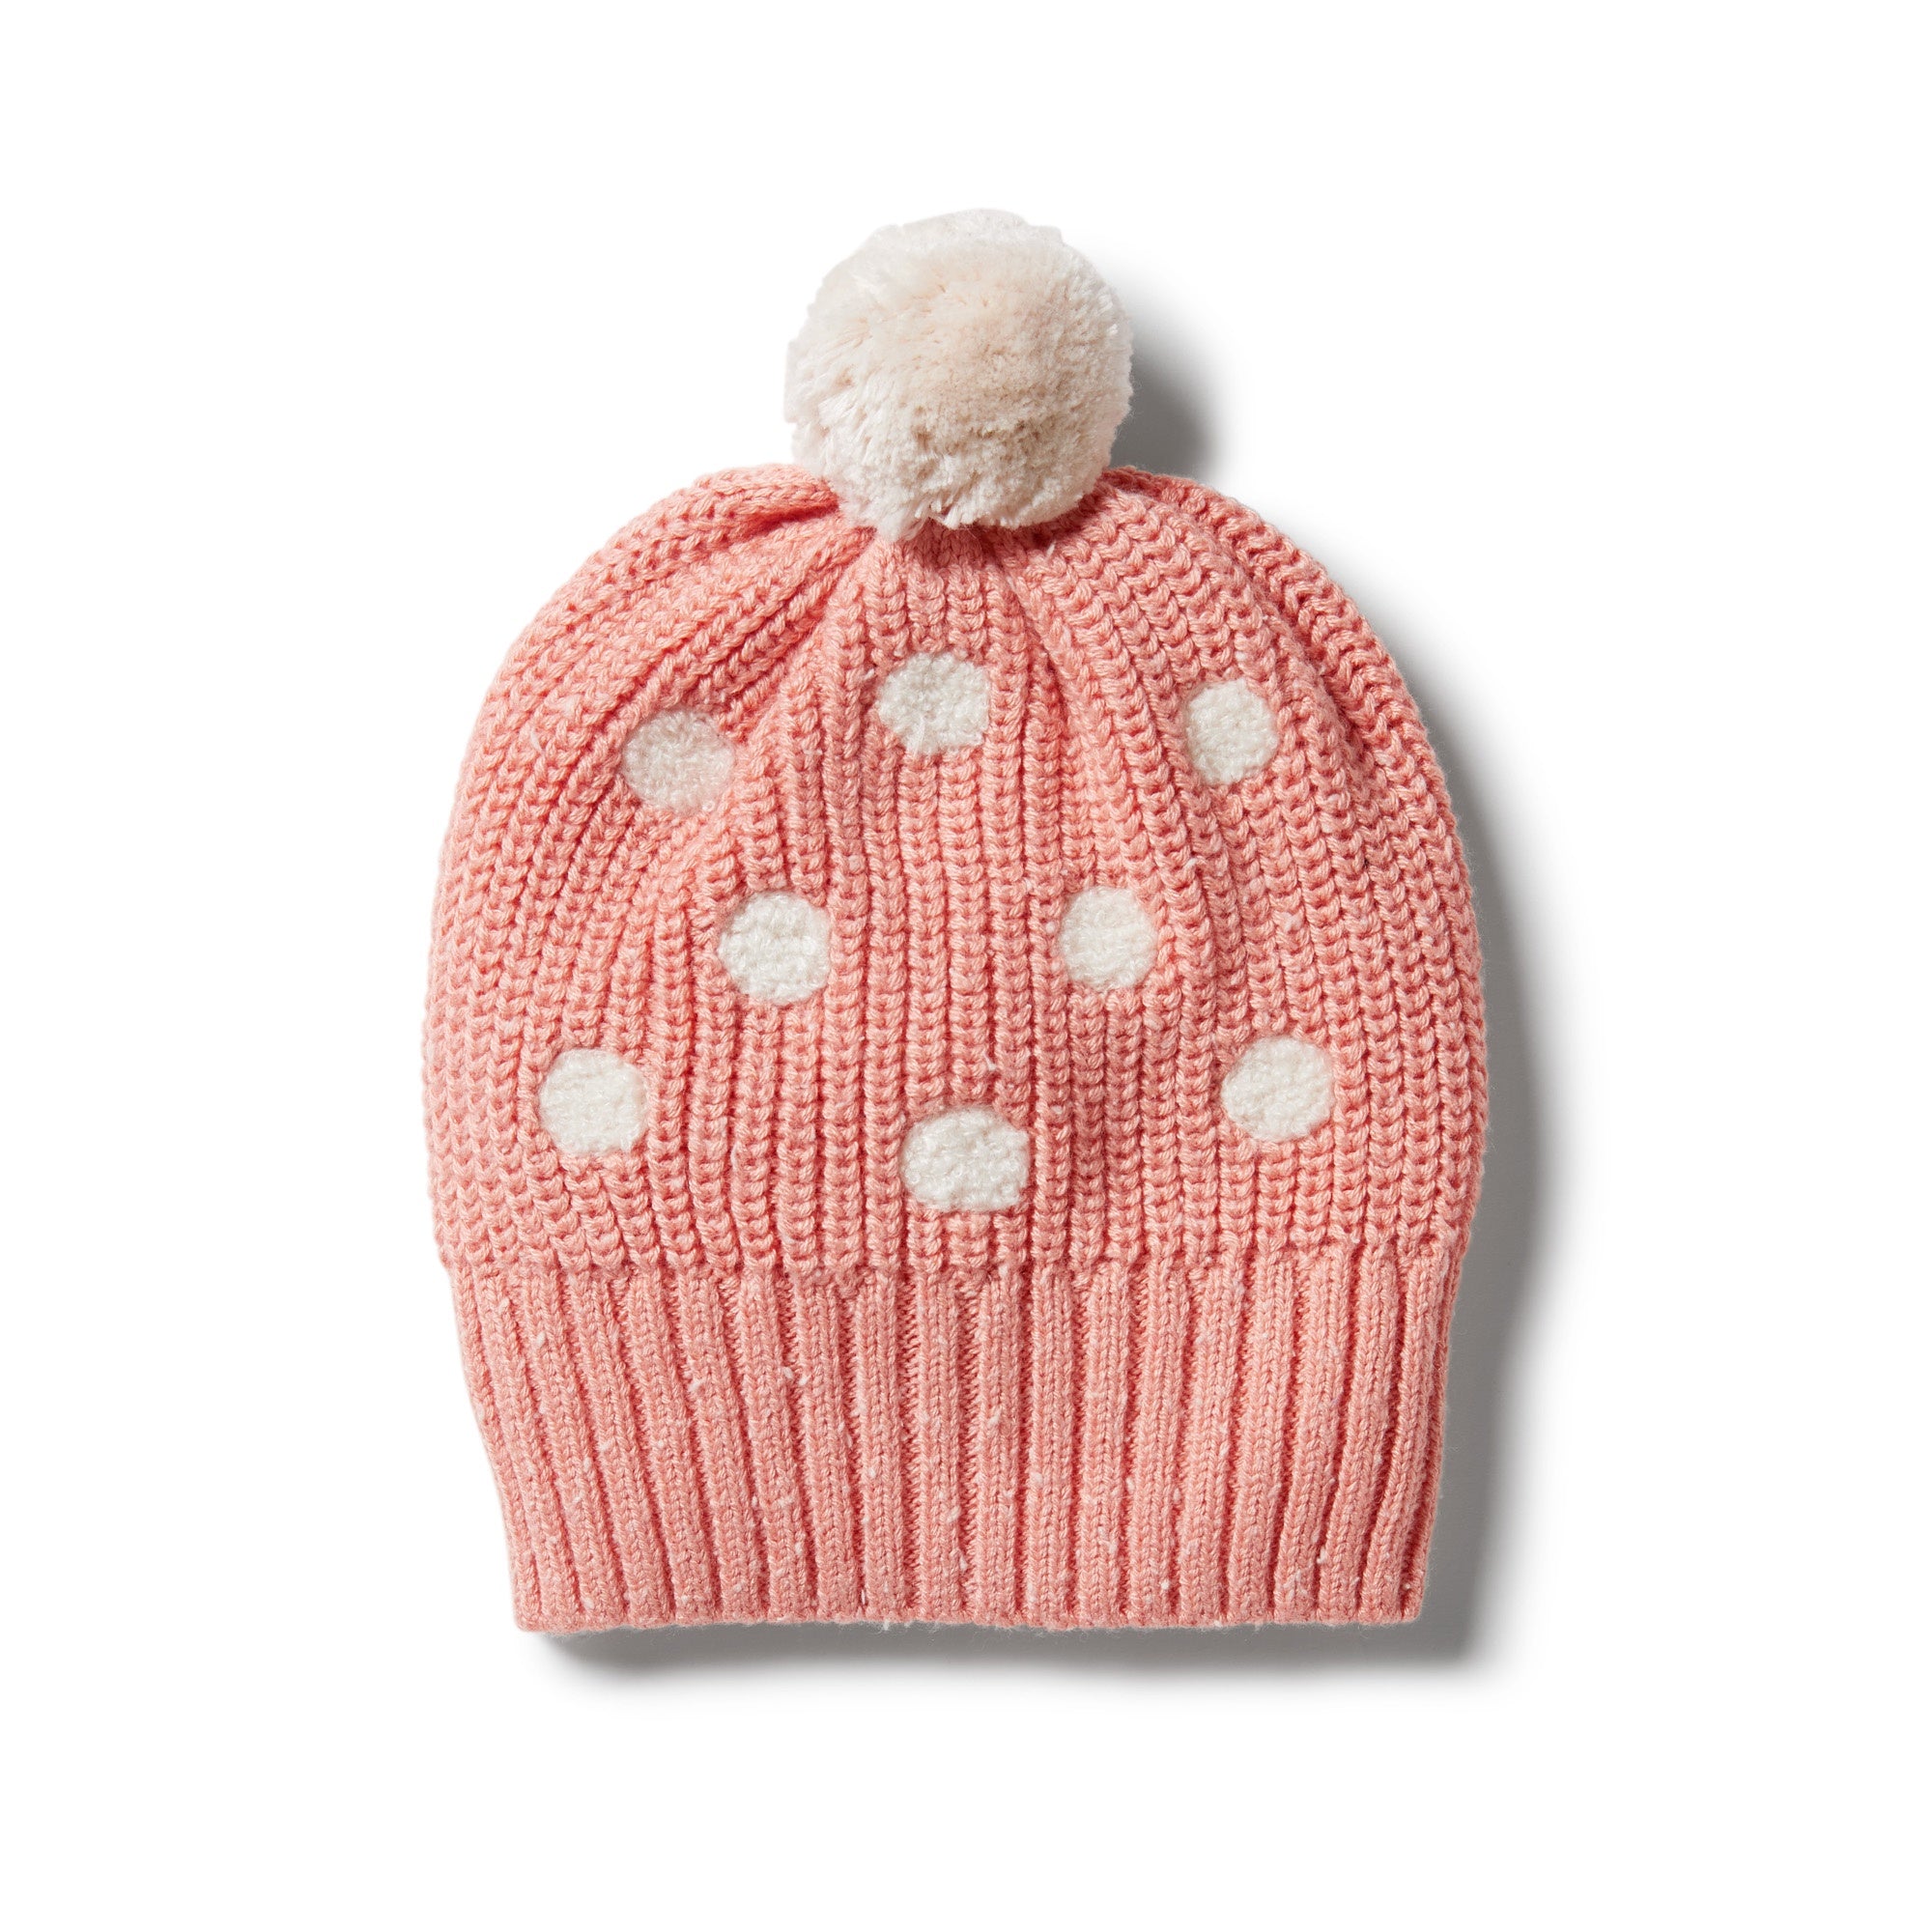 Wilson & Frenchy Knitted Spot Hat - Flamingo Fleck